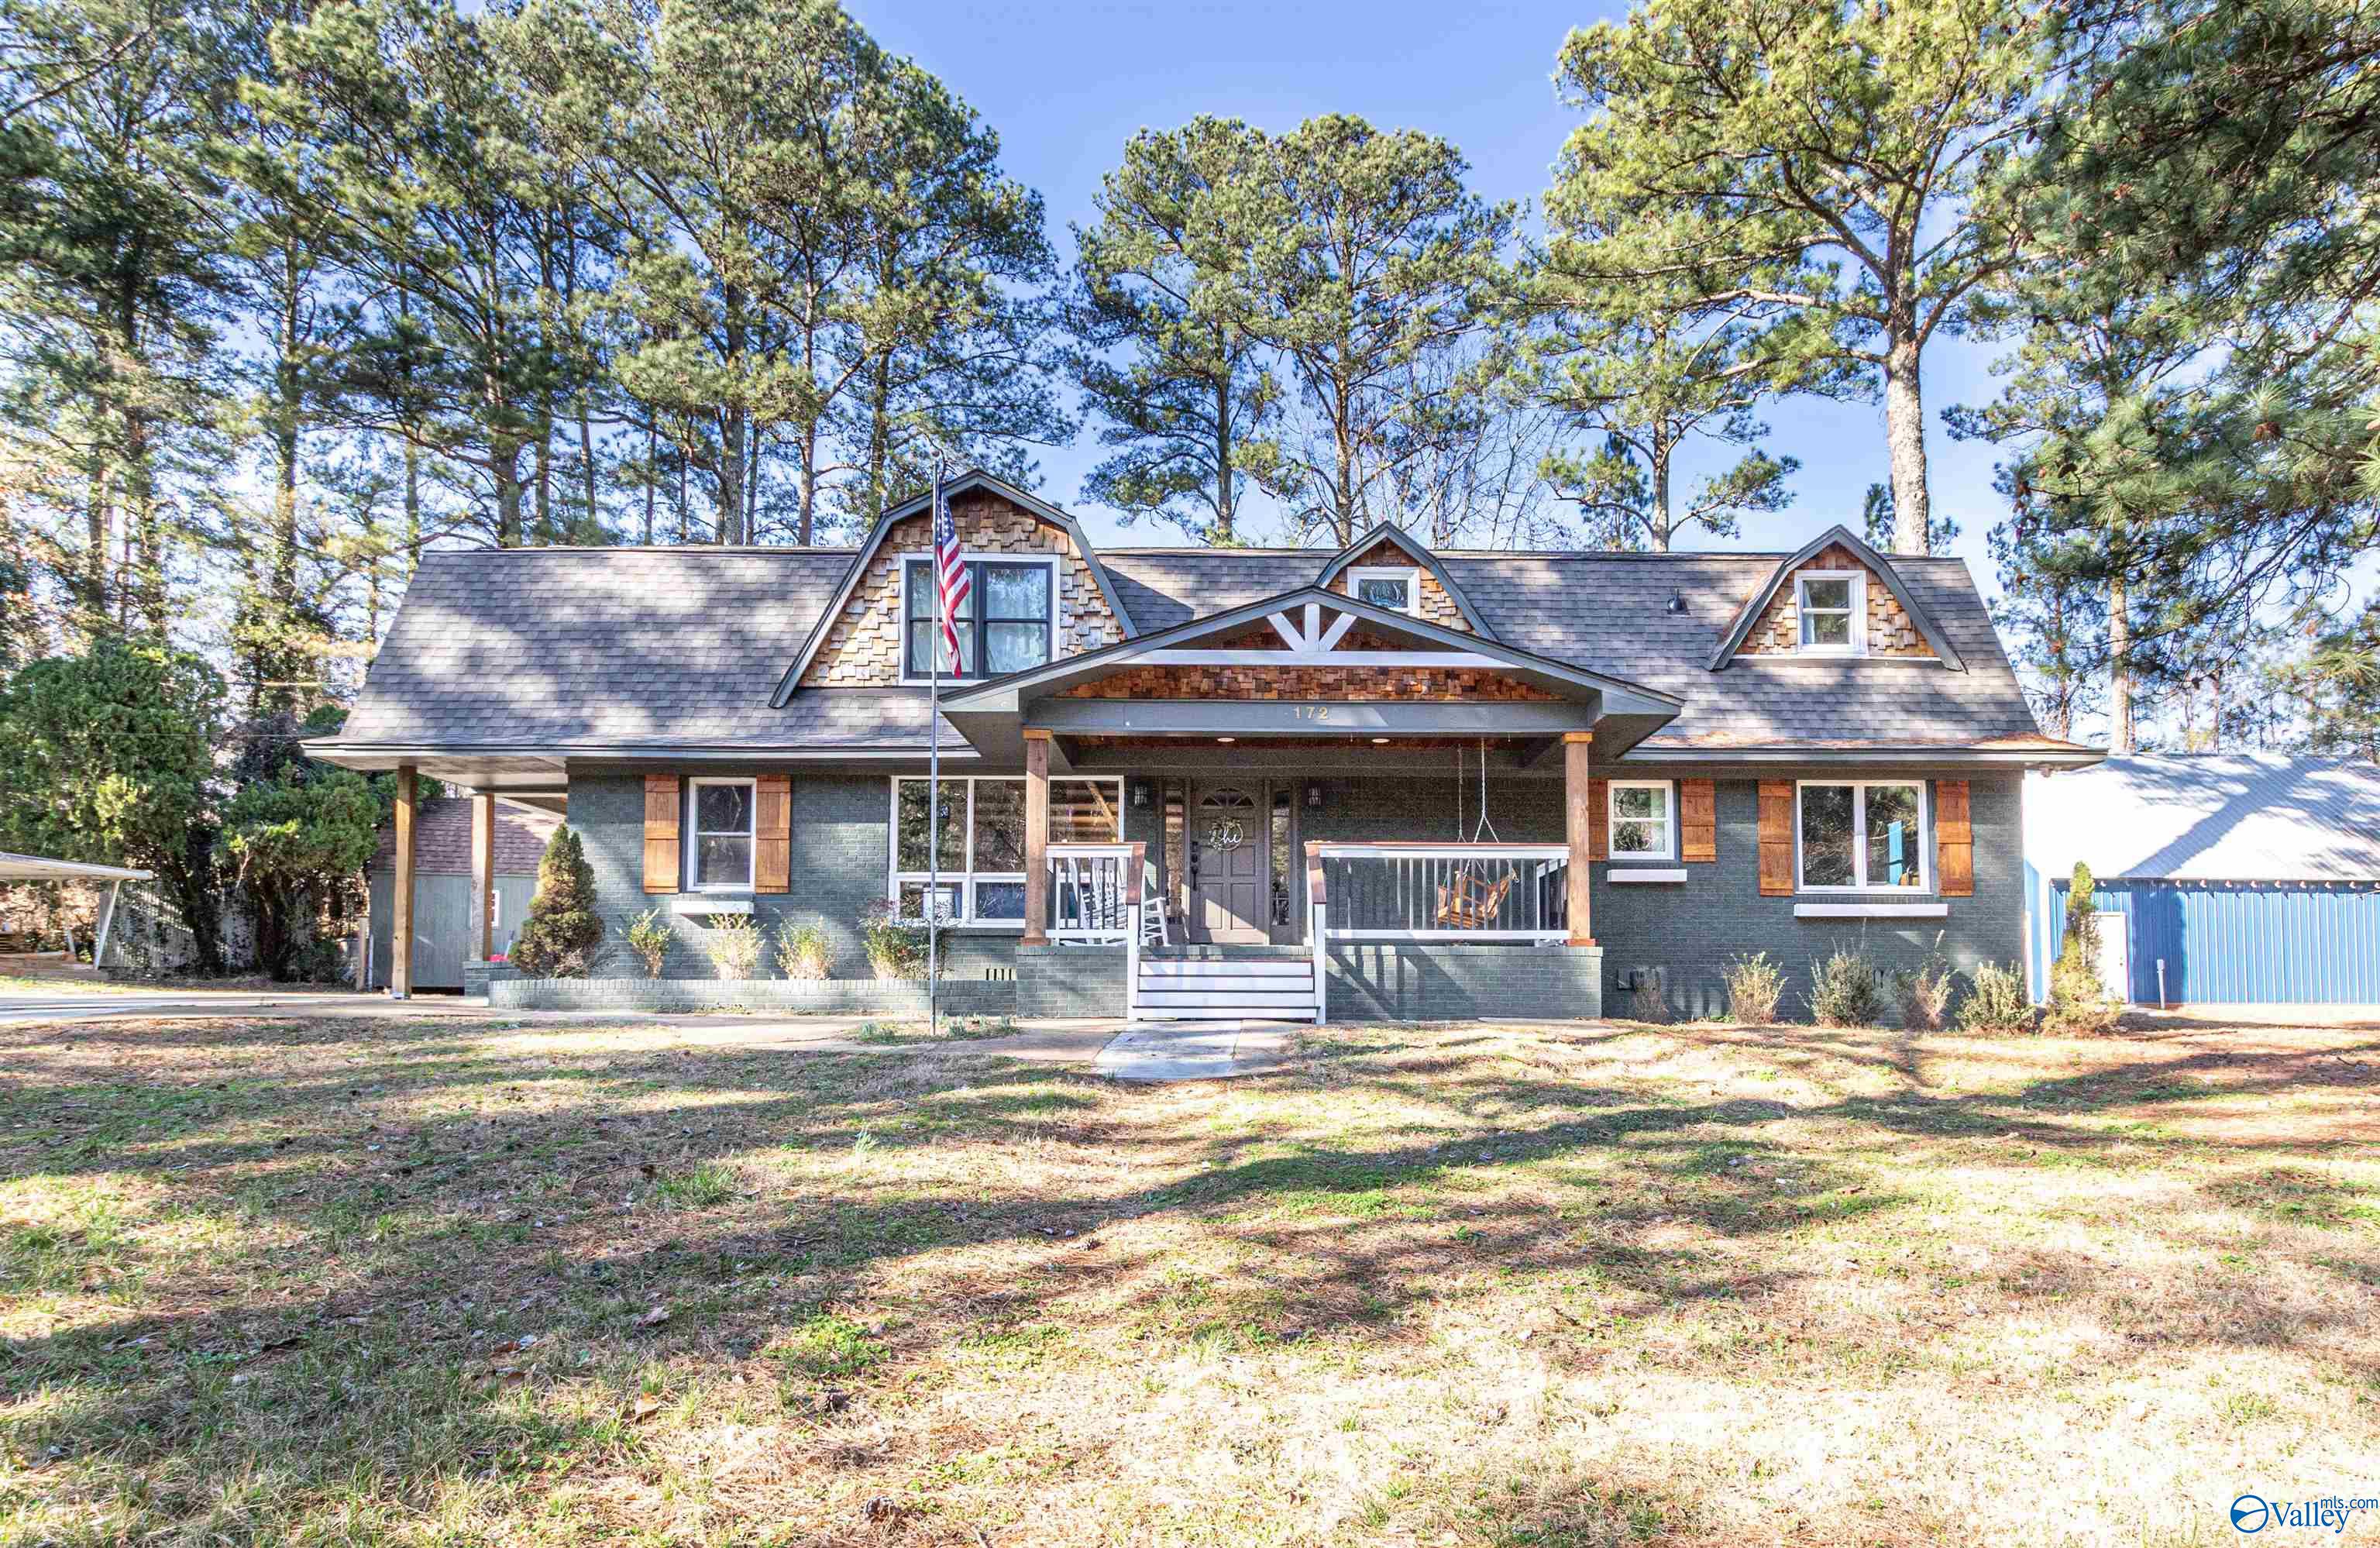 Property: 172 Airport Road,Laceys Spring, AL